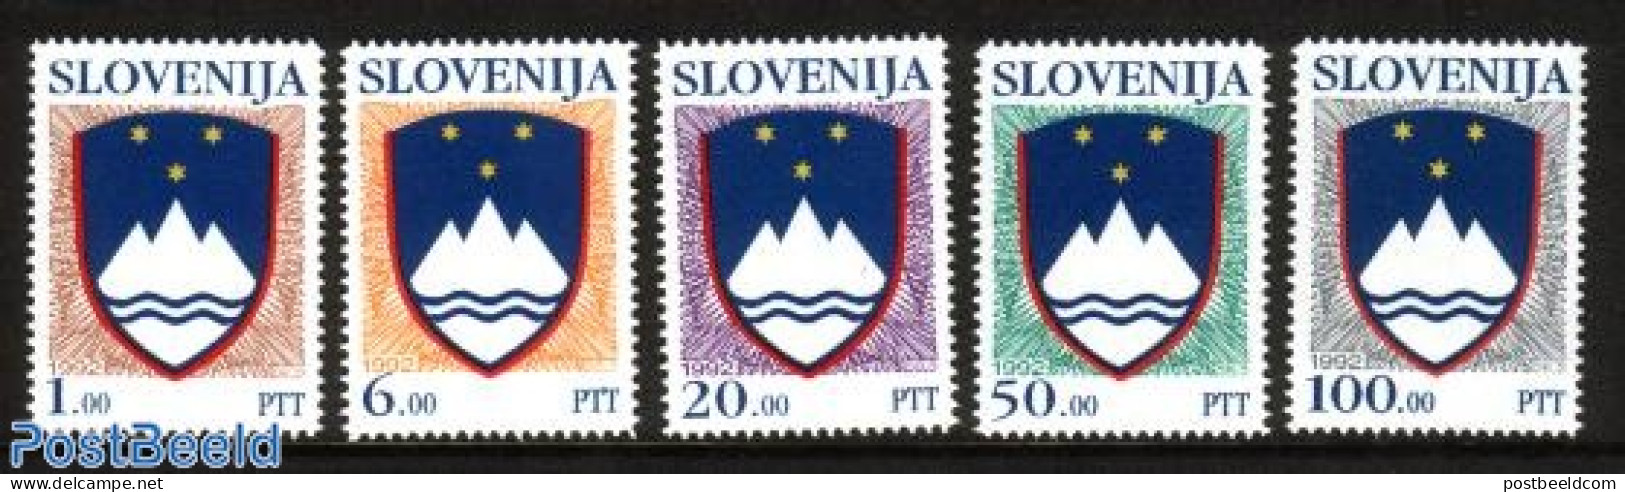 Slovenia 1992 Definitives, State Coat Of Arms 5v, Mint NH, History - Coat Of Arms - Eslovenia